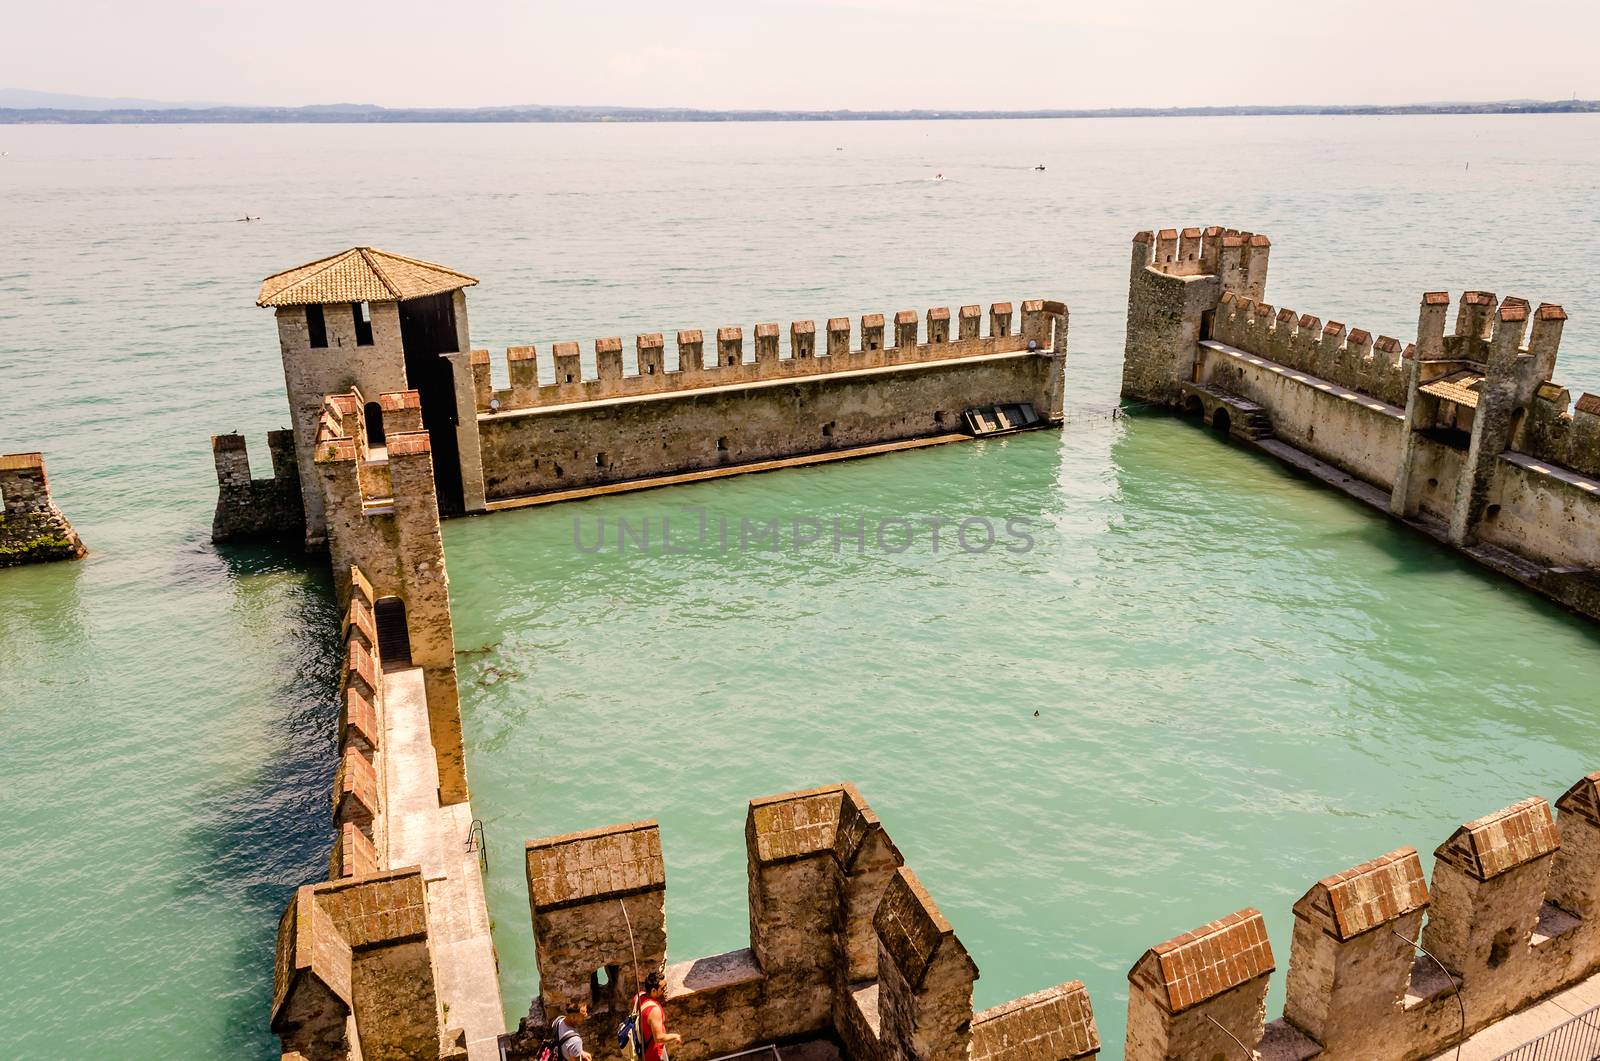 SIRMIONE, ITALY - JUNE 1, 2014: The Scaliger Castle in Sirmione, Italy, June 1, 2014. Surrounded by the water, the Scaliger Castle is considered one of the finest examples of medieval fortification.